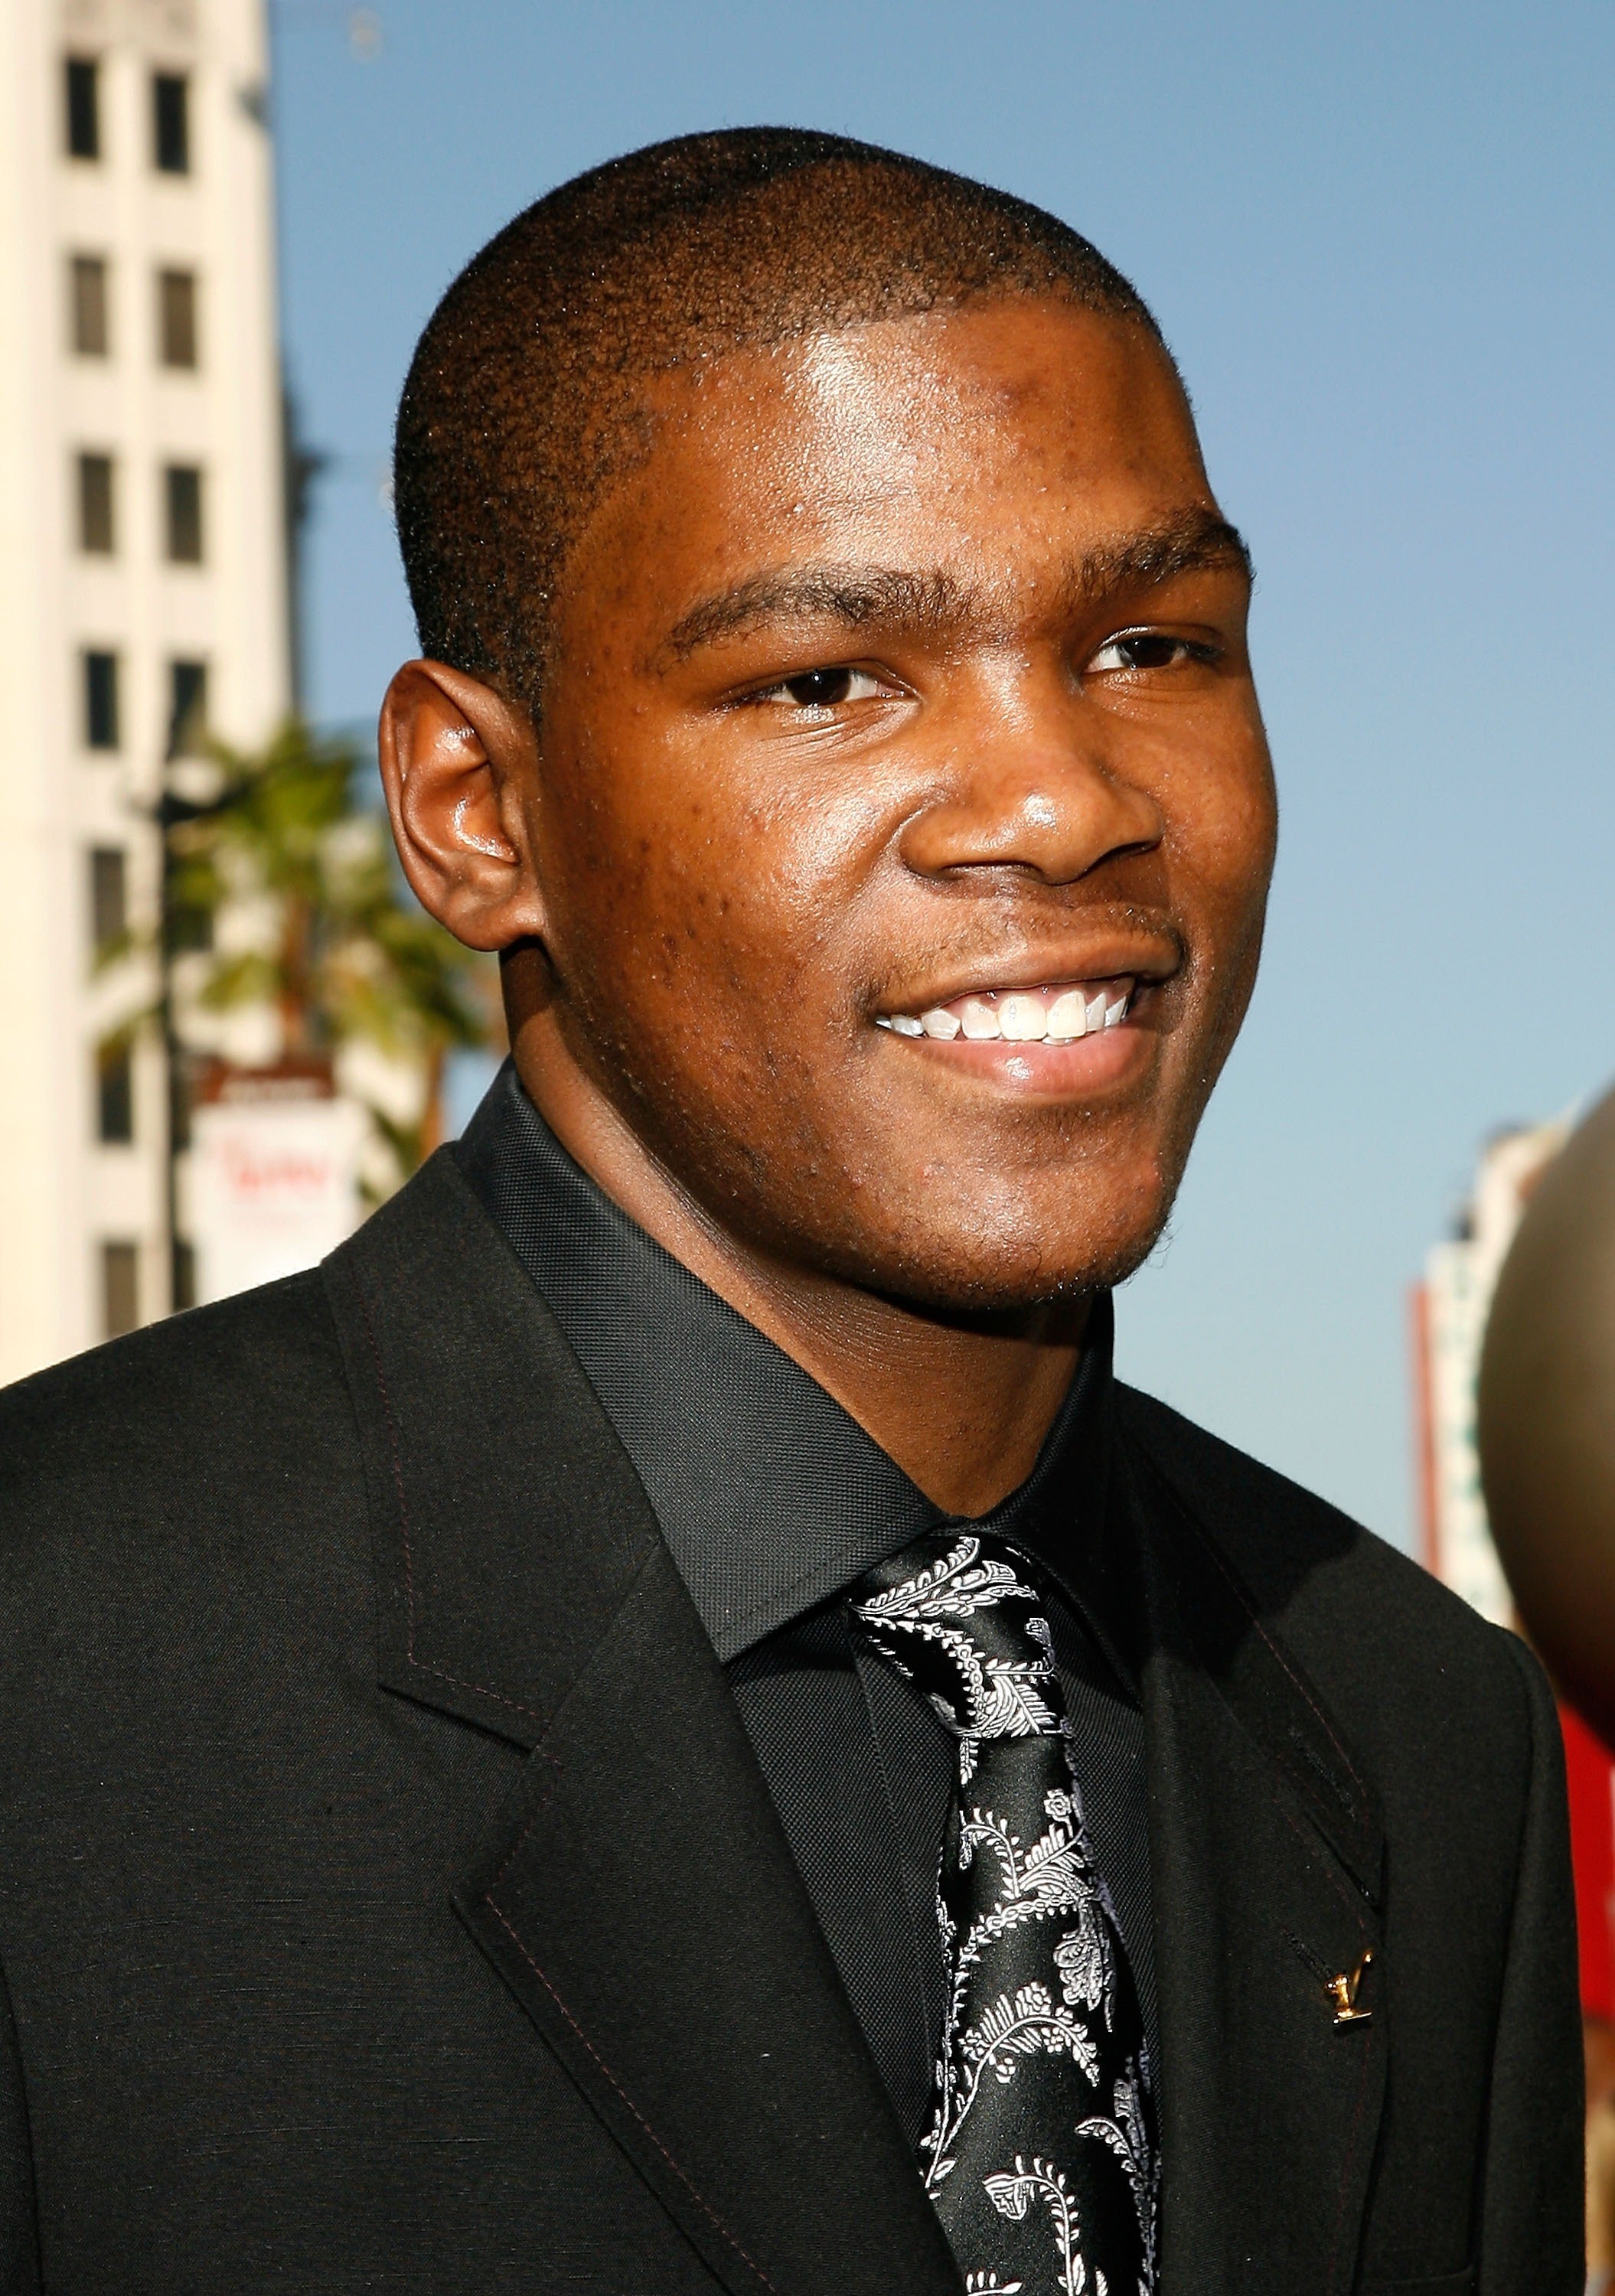 Young Kevin Durant in suit.